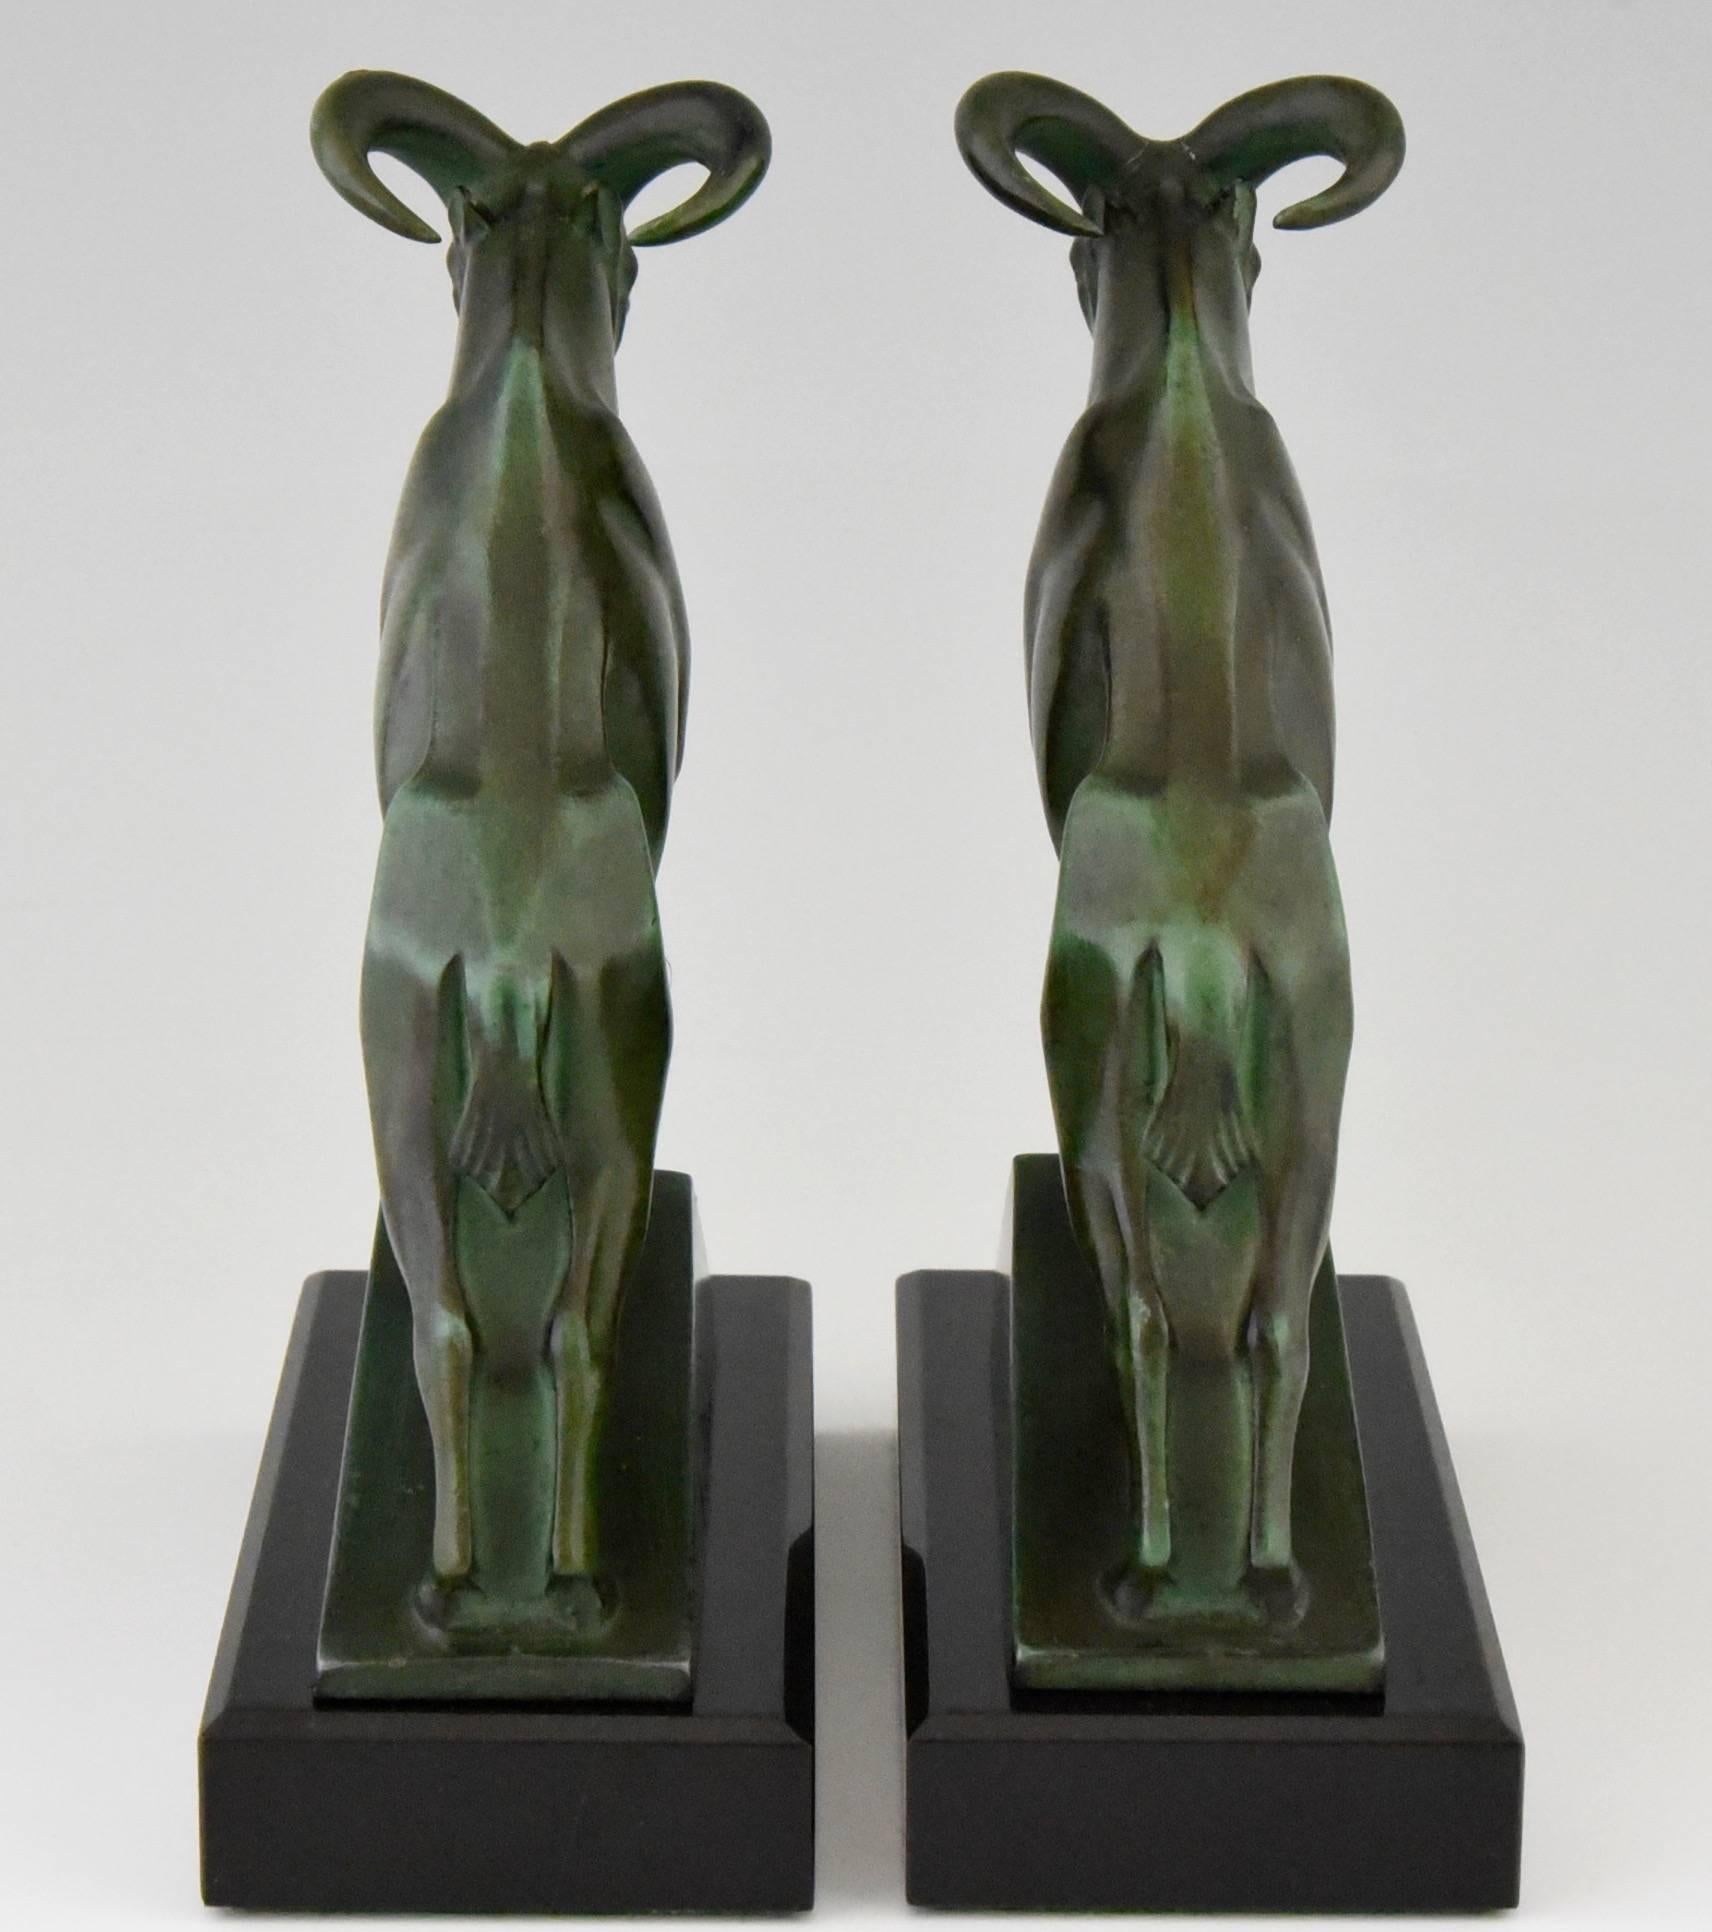 Patinated French Art Deco Ram Bookends by Max Le Verrier, 1930